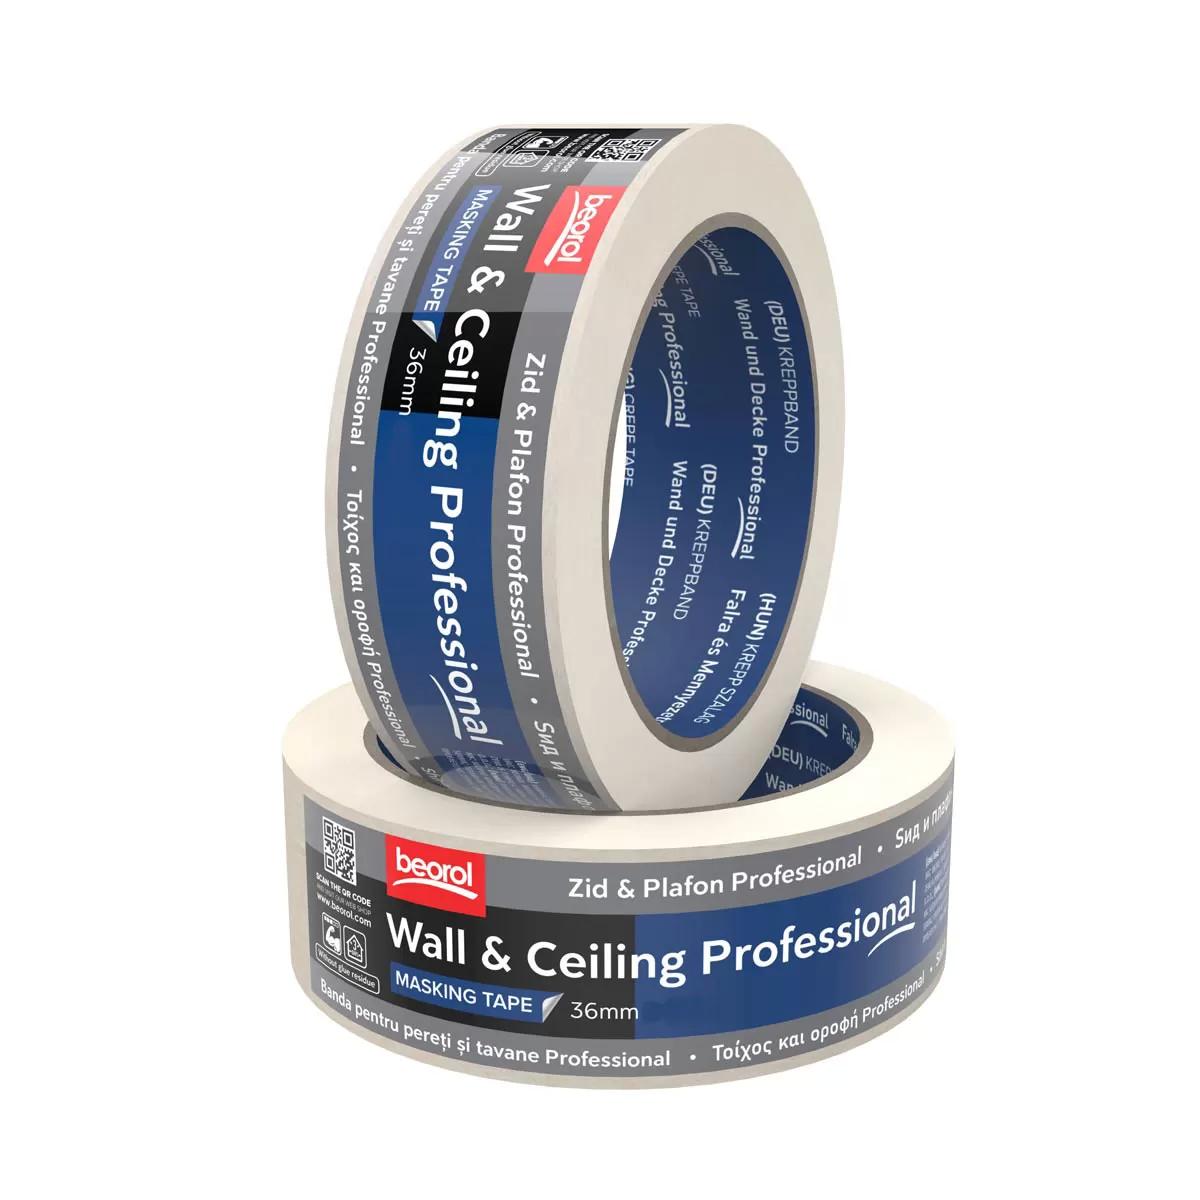 Masking tape Wall & Ceiling Professional, 36mm x 50m 